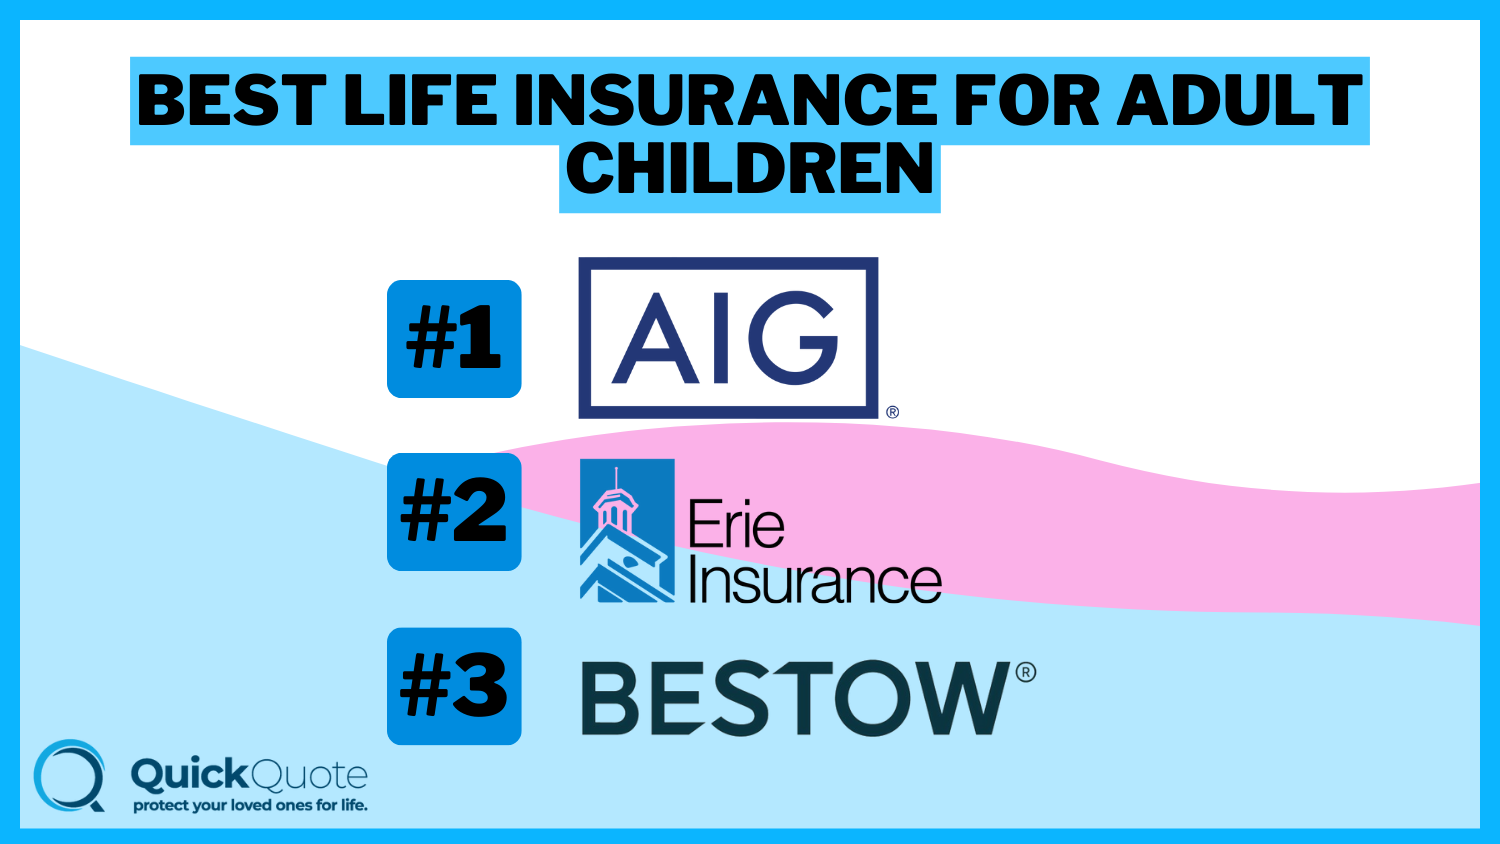 Best Life Insurance for Adult Children: AIG, Erie, and Bestow